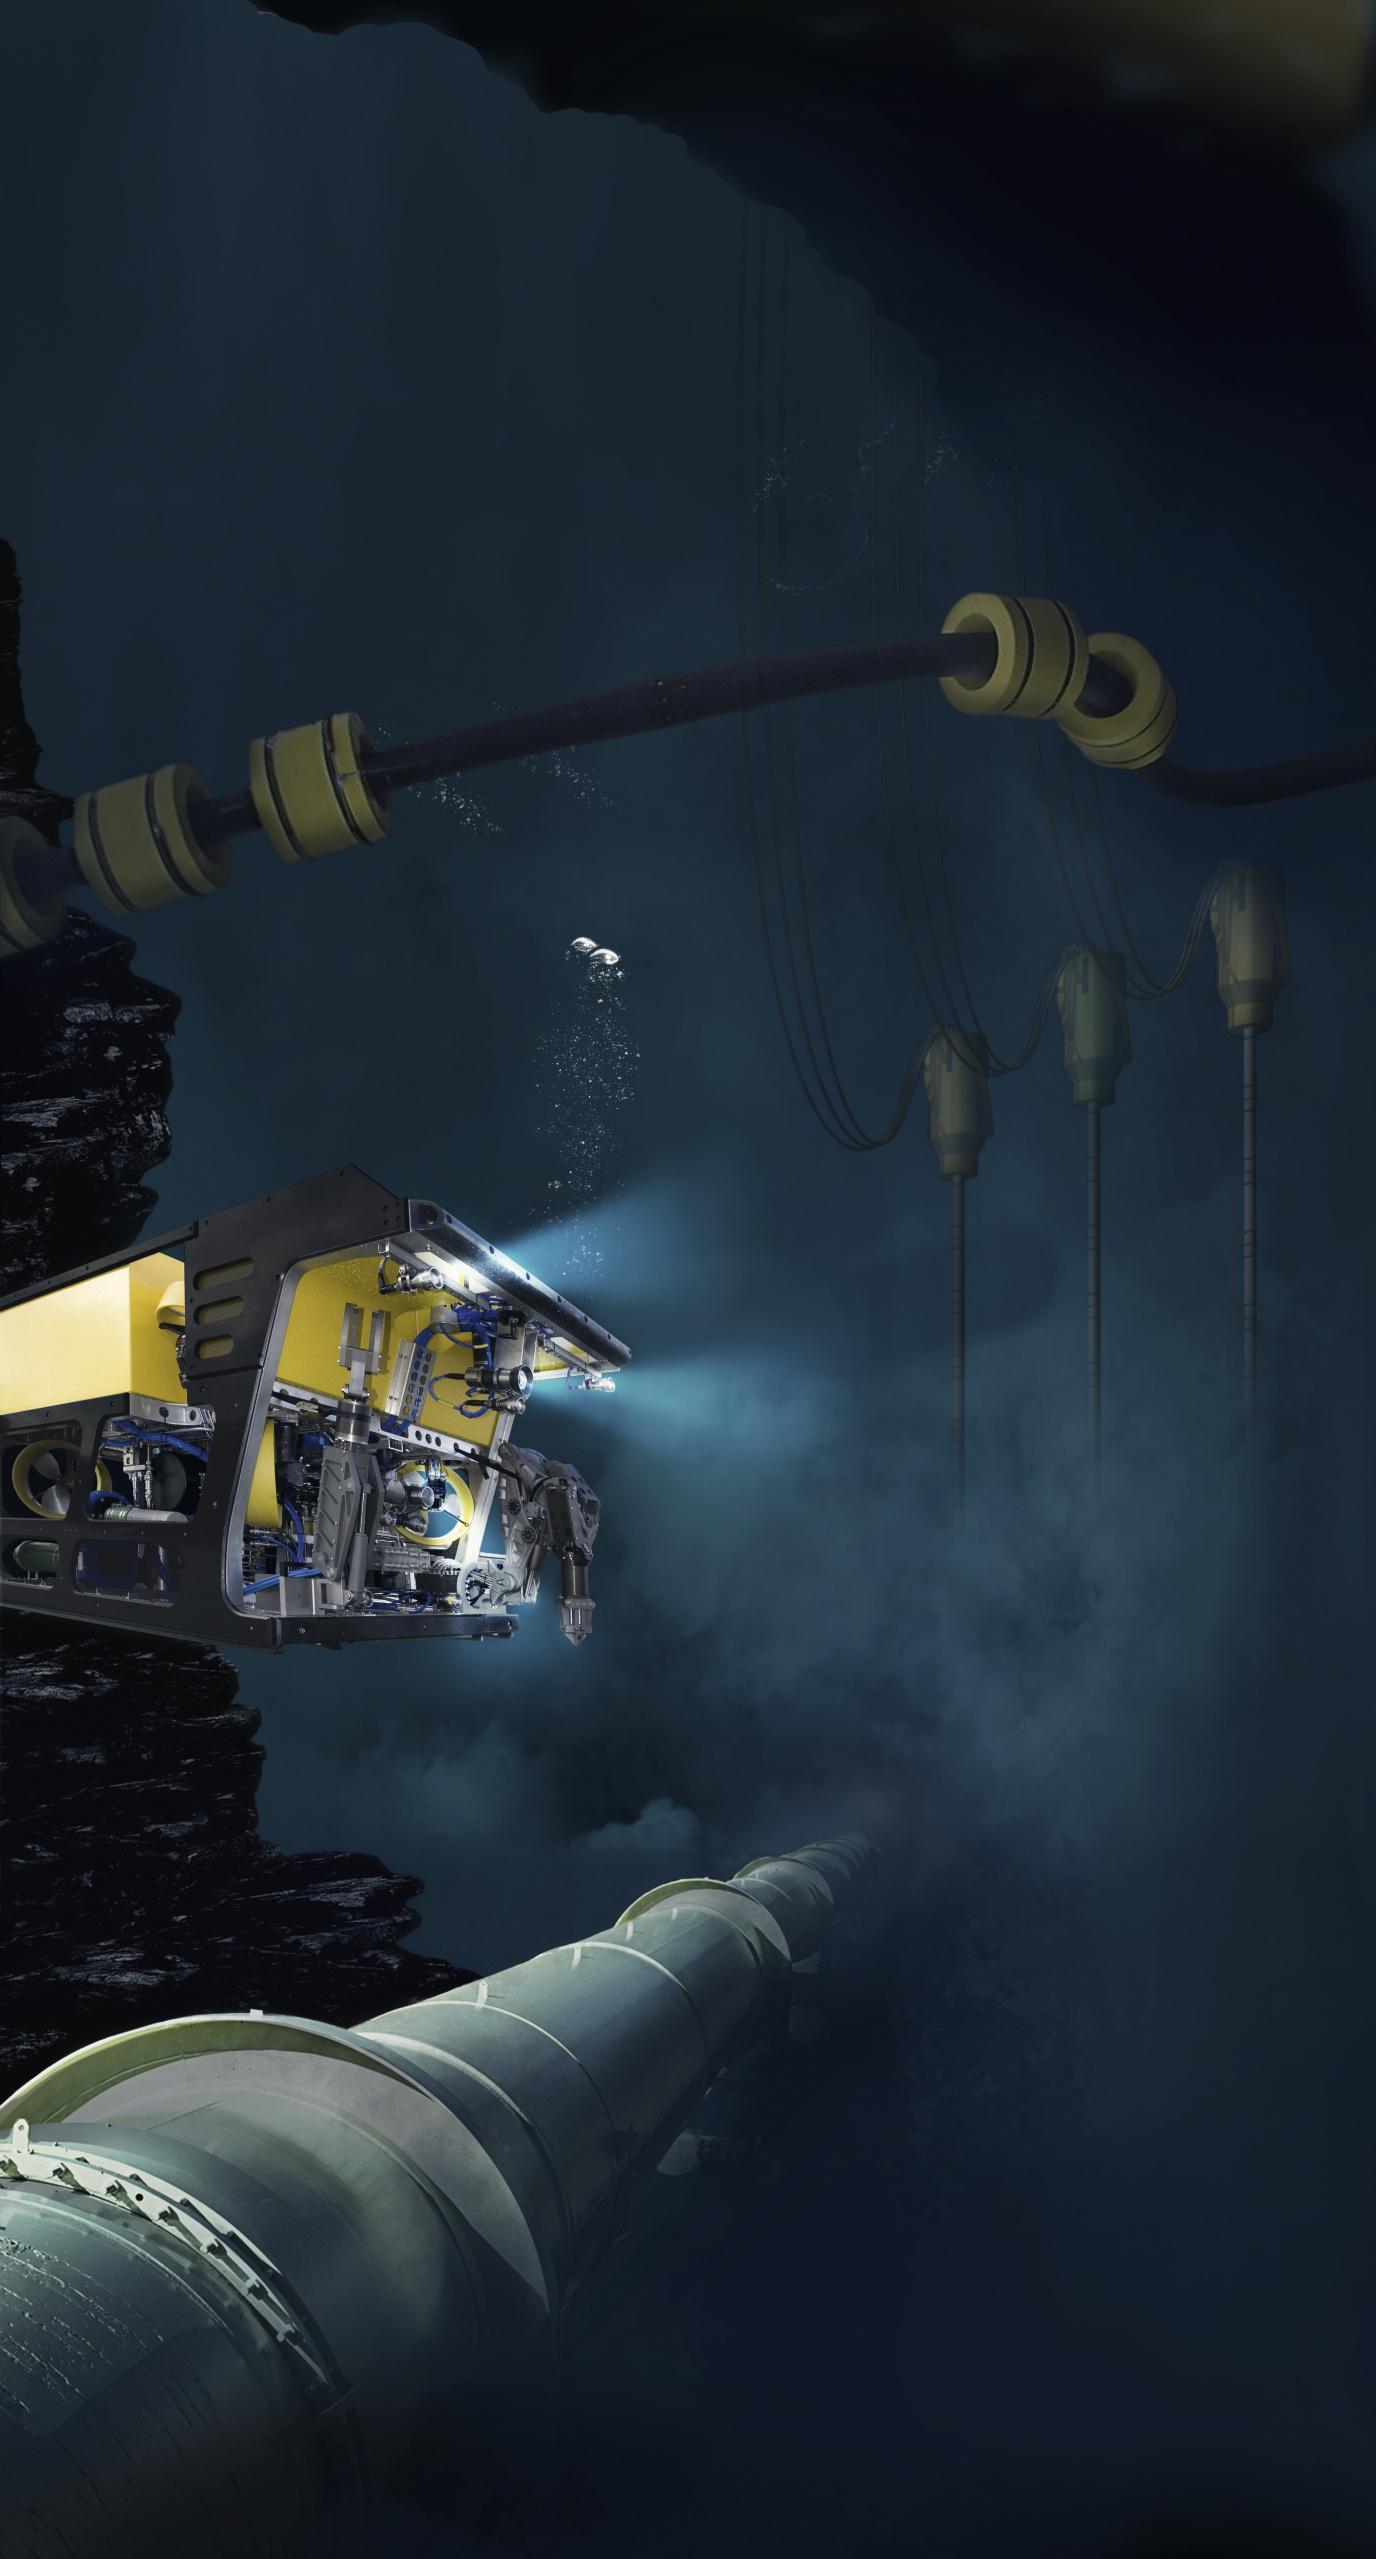 Innovative solutions for high integrity sealing applications developed by Trelleborg are to be showcased at the worlds largest annual subsea exhibition and conference